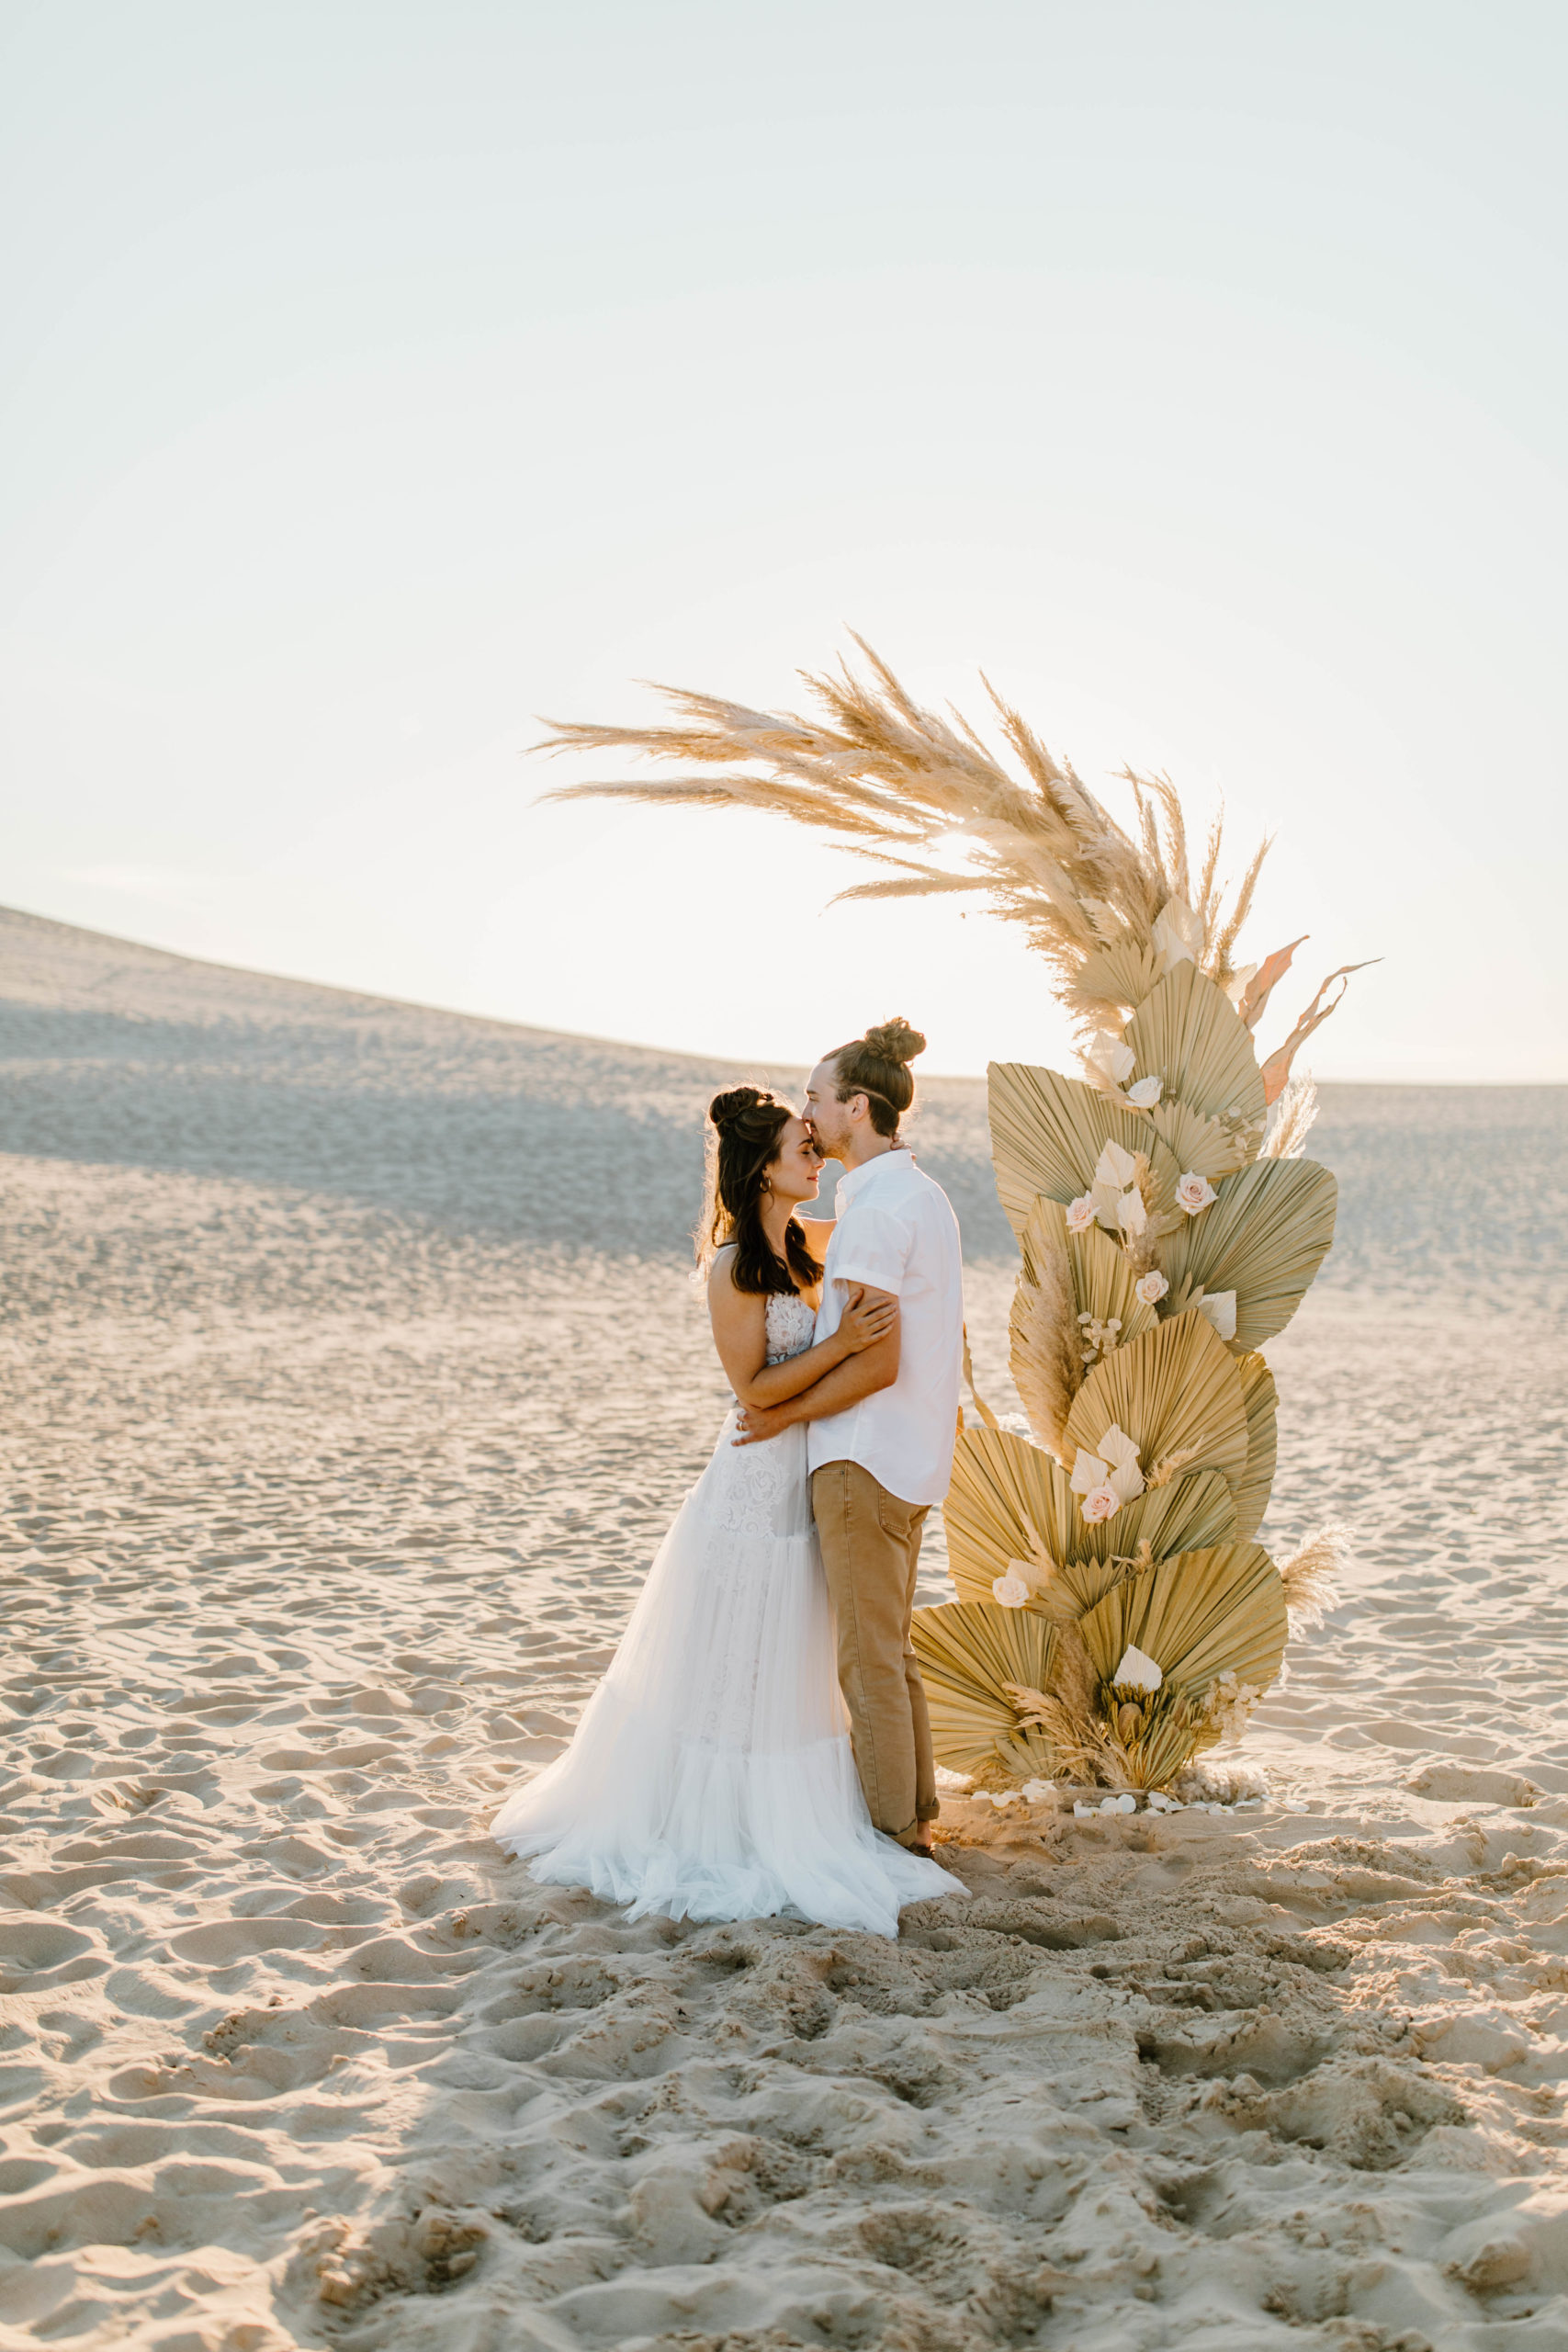 Boho Sand Dune Elopement in front of Palms and Pampas Grass